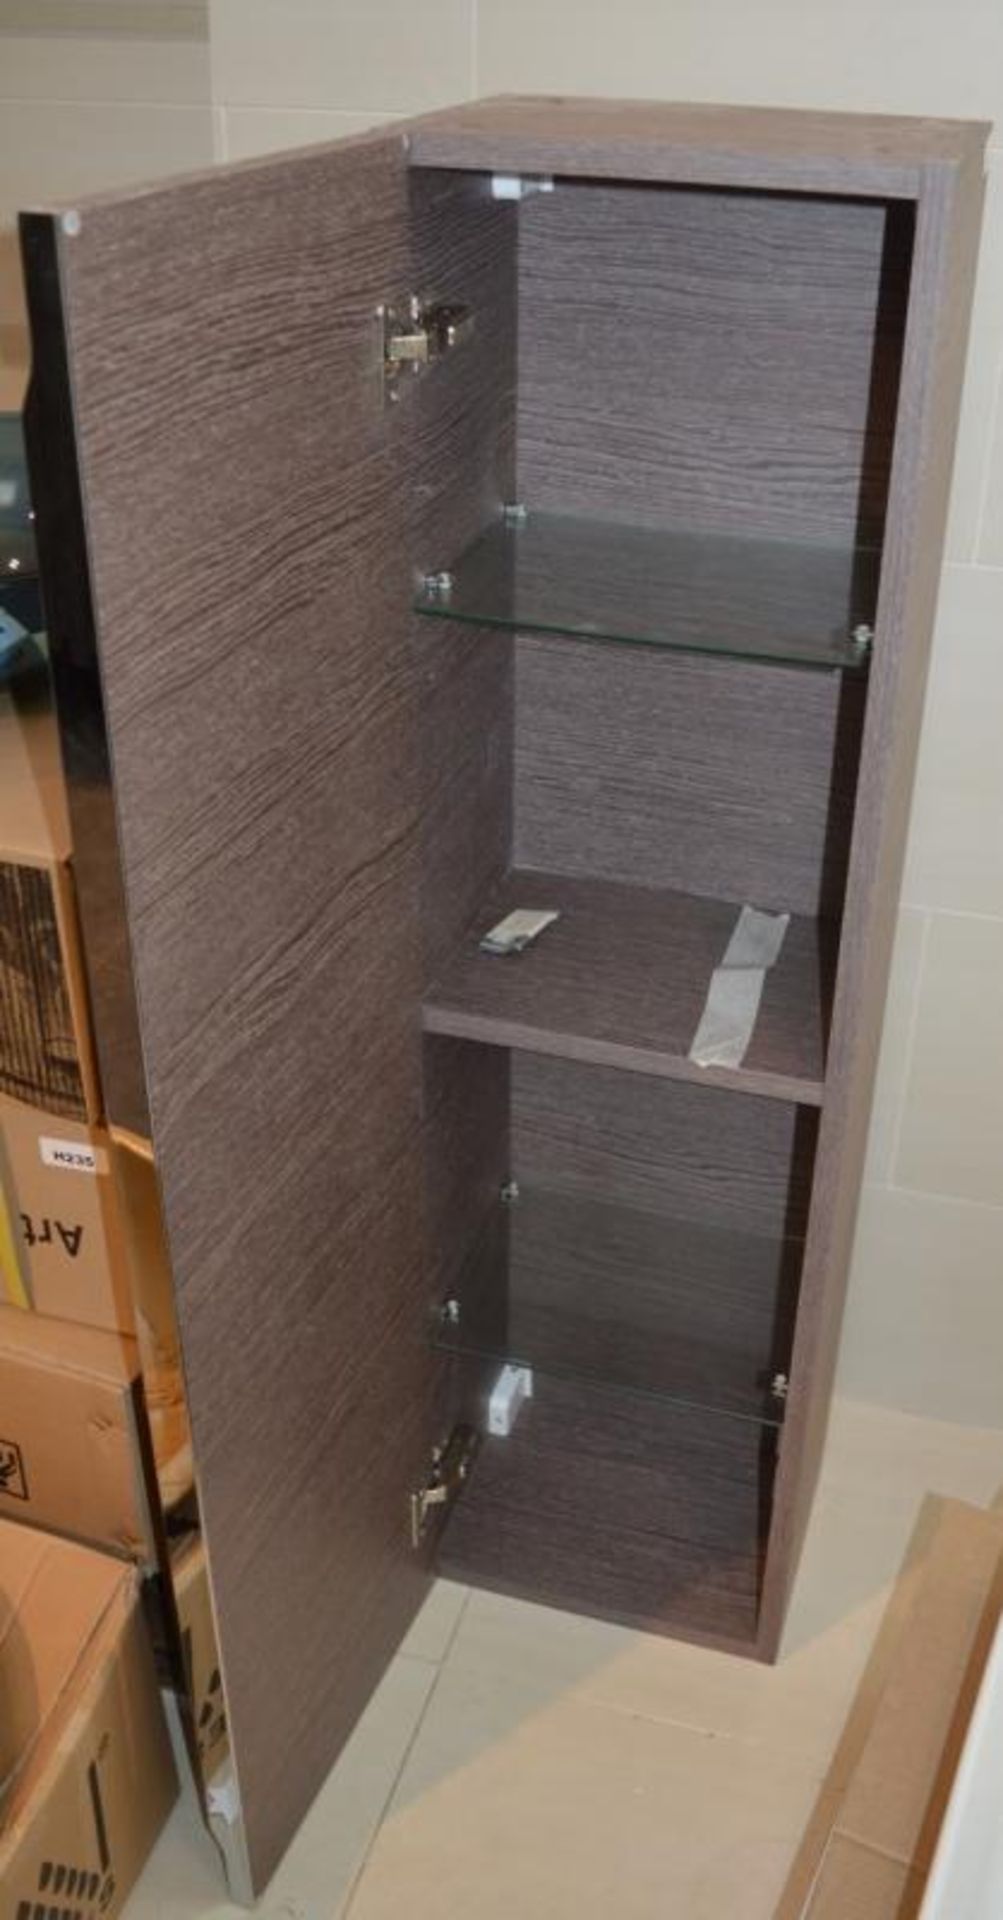 1 x Wall Hung Bathroom Storage Cabinet Finished in Driftwood With Chrome Handle and Internal Shelves - Image 2 of 4